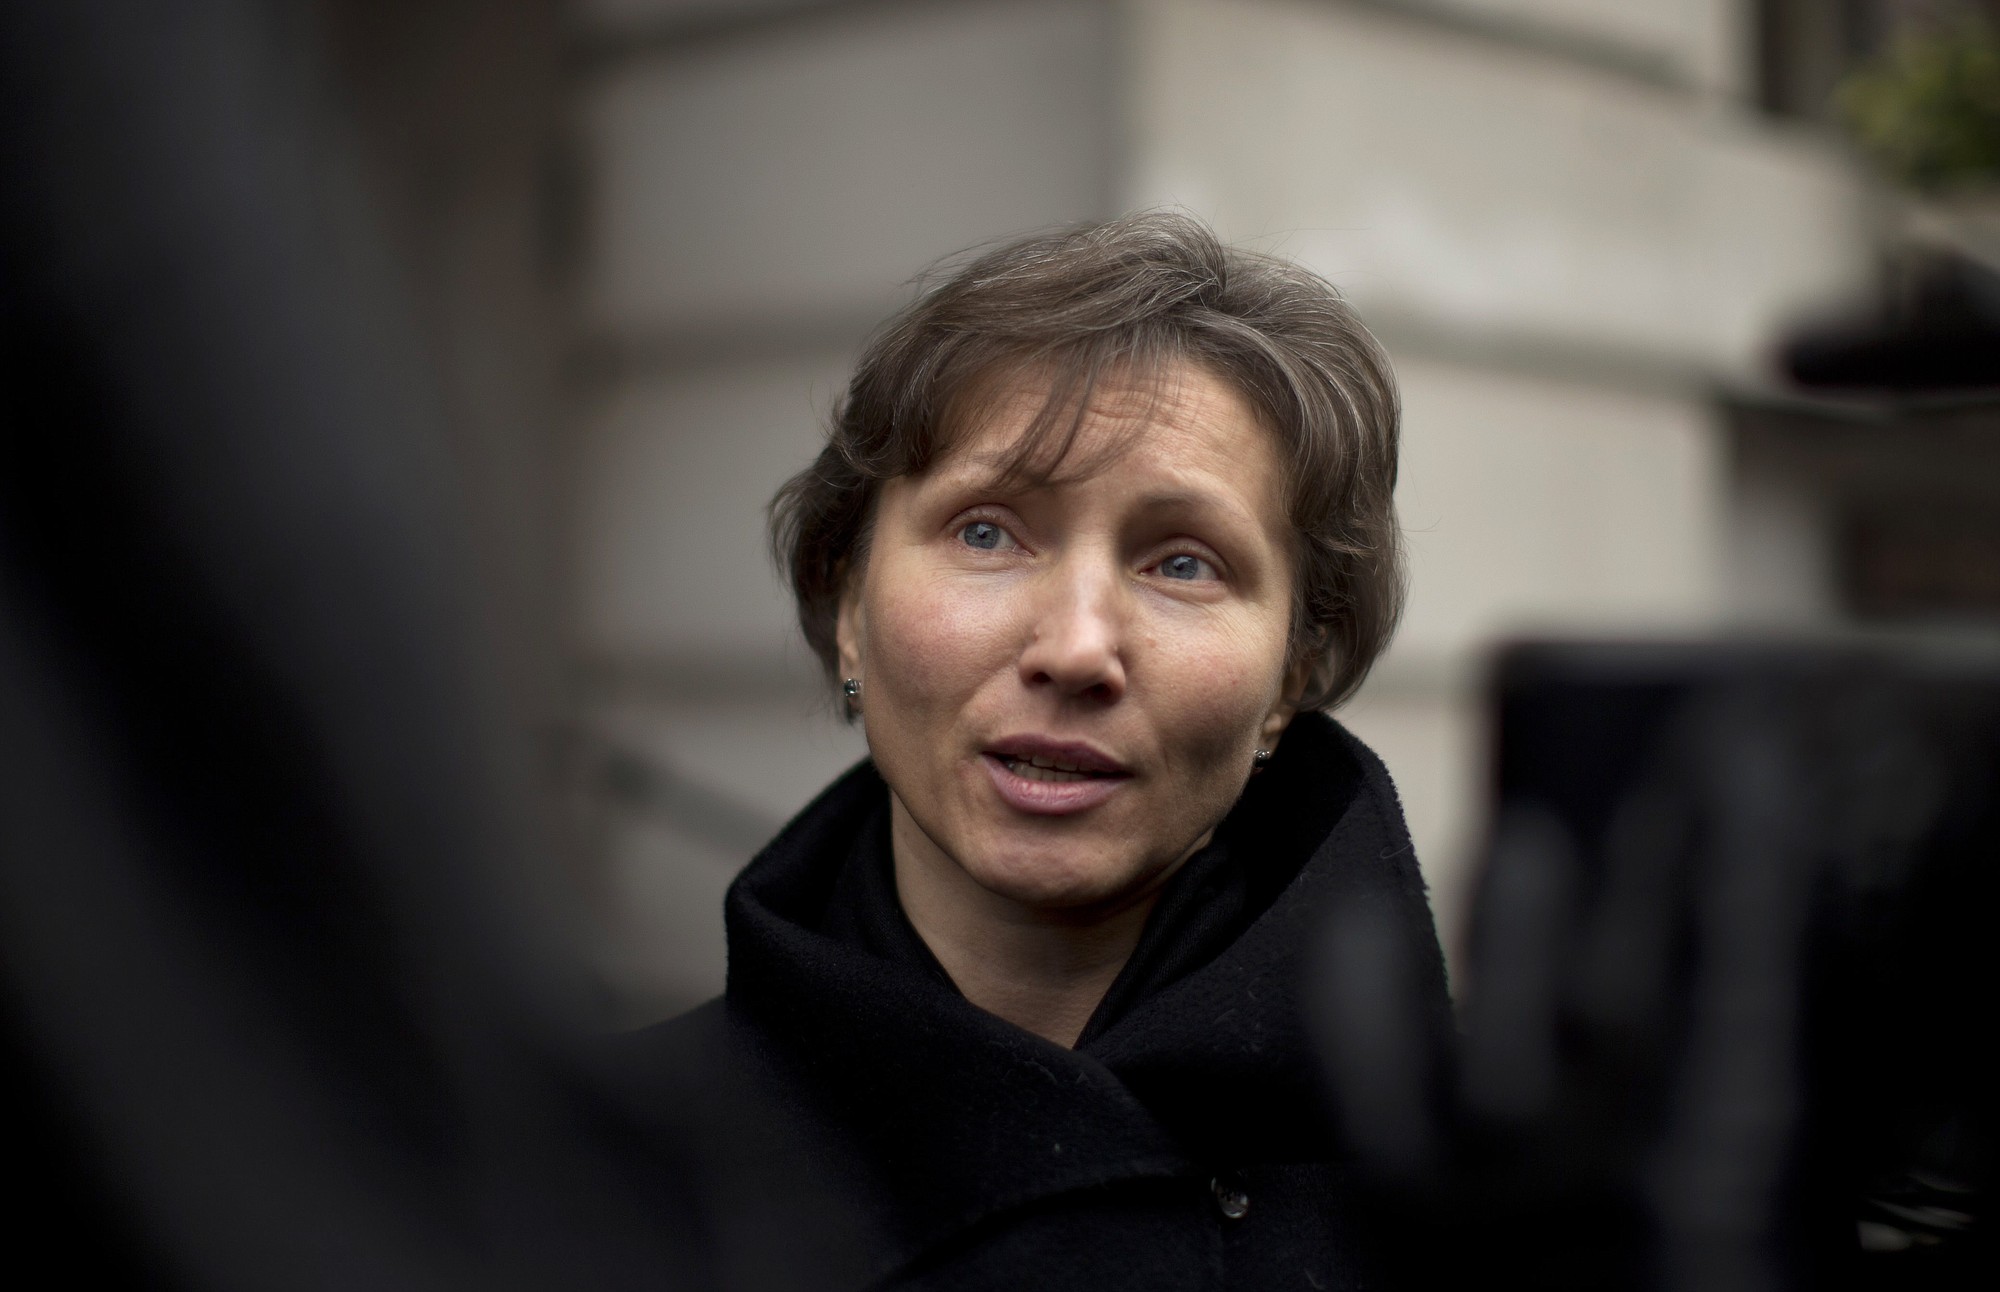 FILE - In this Thursday, Dec. 13, 2012 file photo, Marina Litvinenko, the widow of former Russian intelligence officer Alexander Litvinenko, speaks to the media as she leaves at the end of a pre-inquest review at Camden Town Hall in London. More than eight years on and with the U.K.-Russia relations at their iciest since the Cold War, an inquiry is opening on Tuesday, Jan. 27, 2015 into the killing of the Russian intelligence agent turned Kremlin critic.